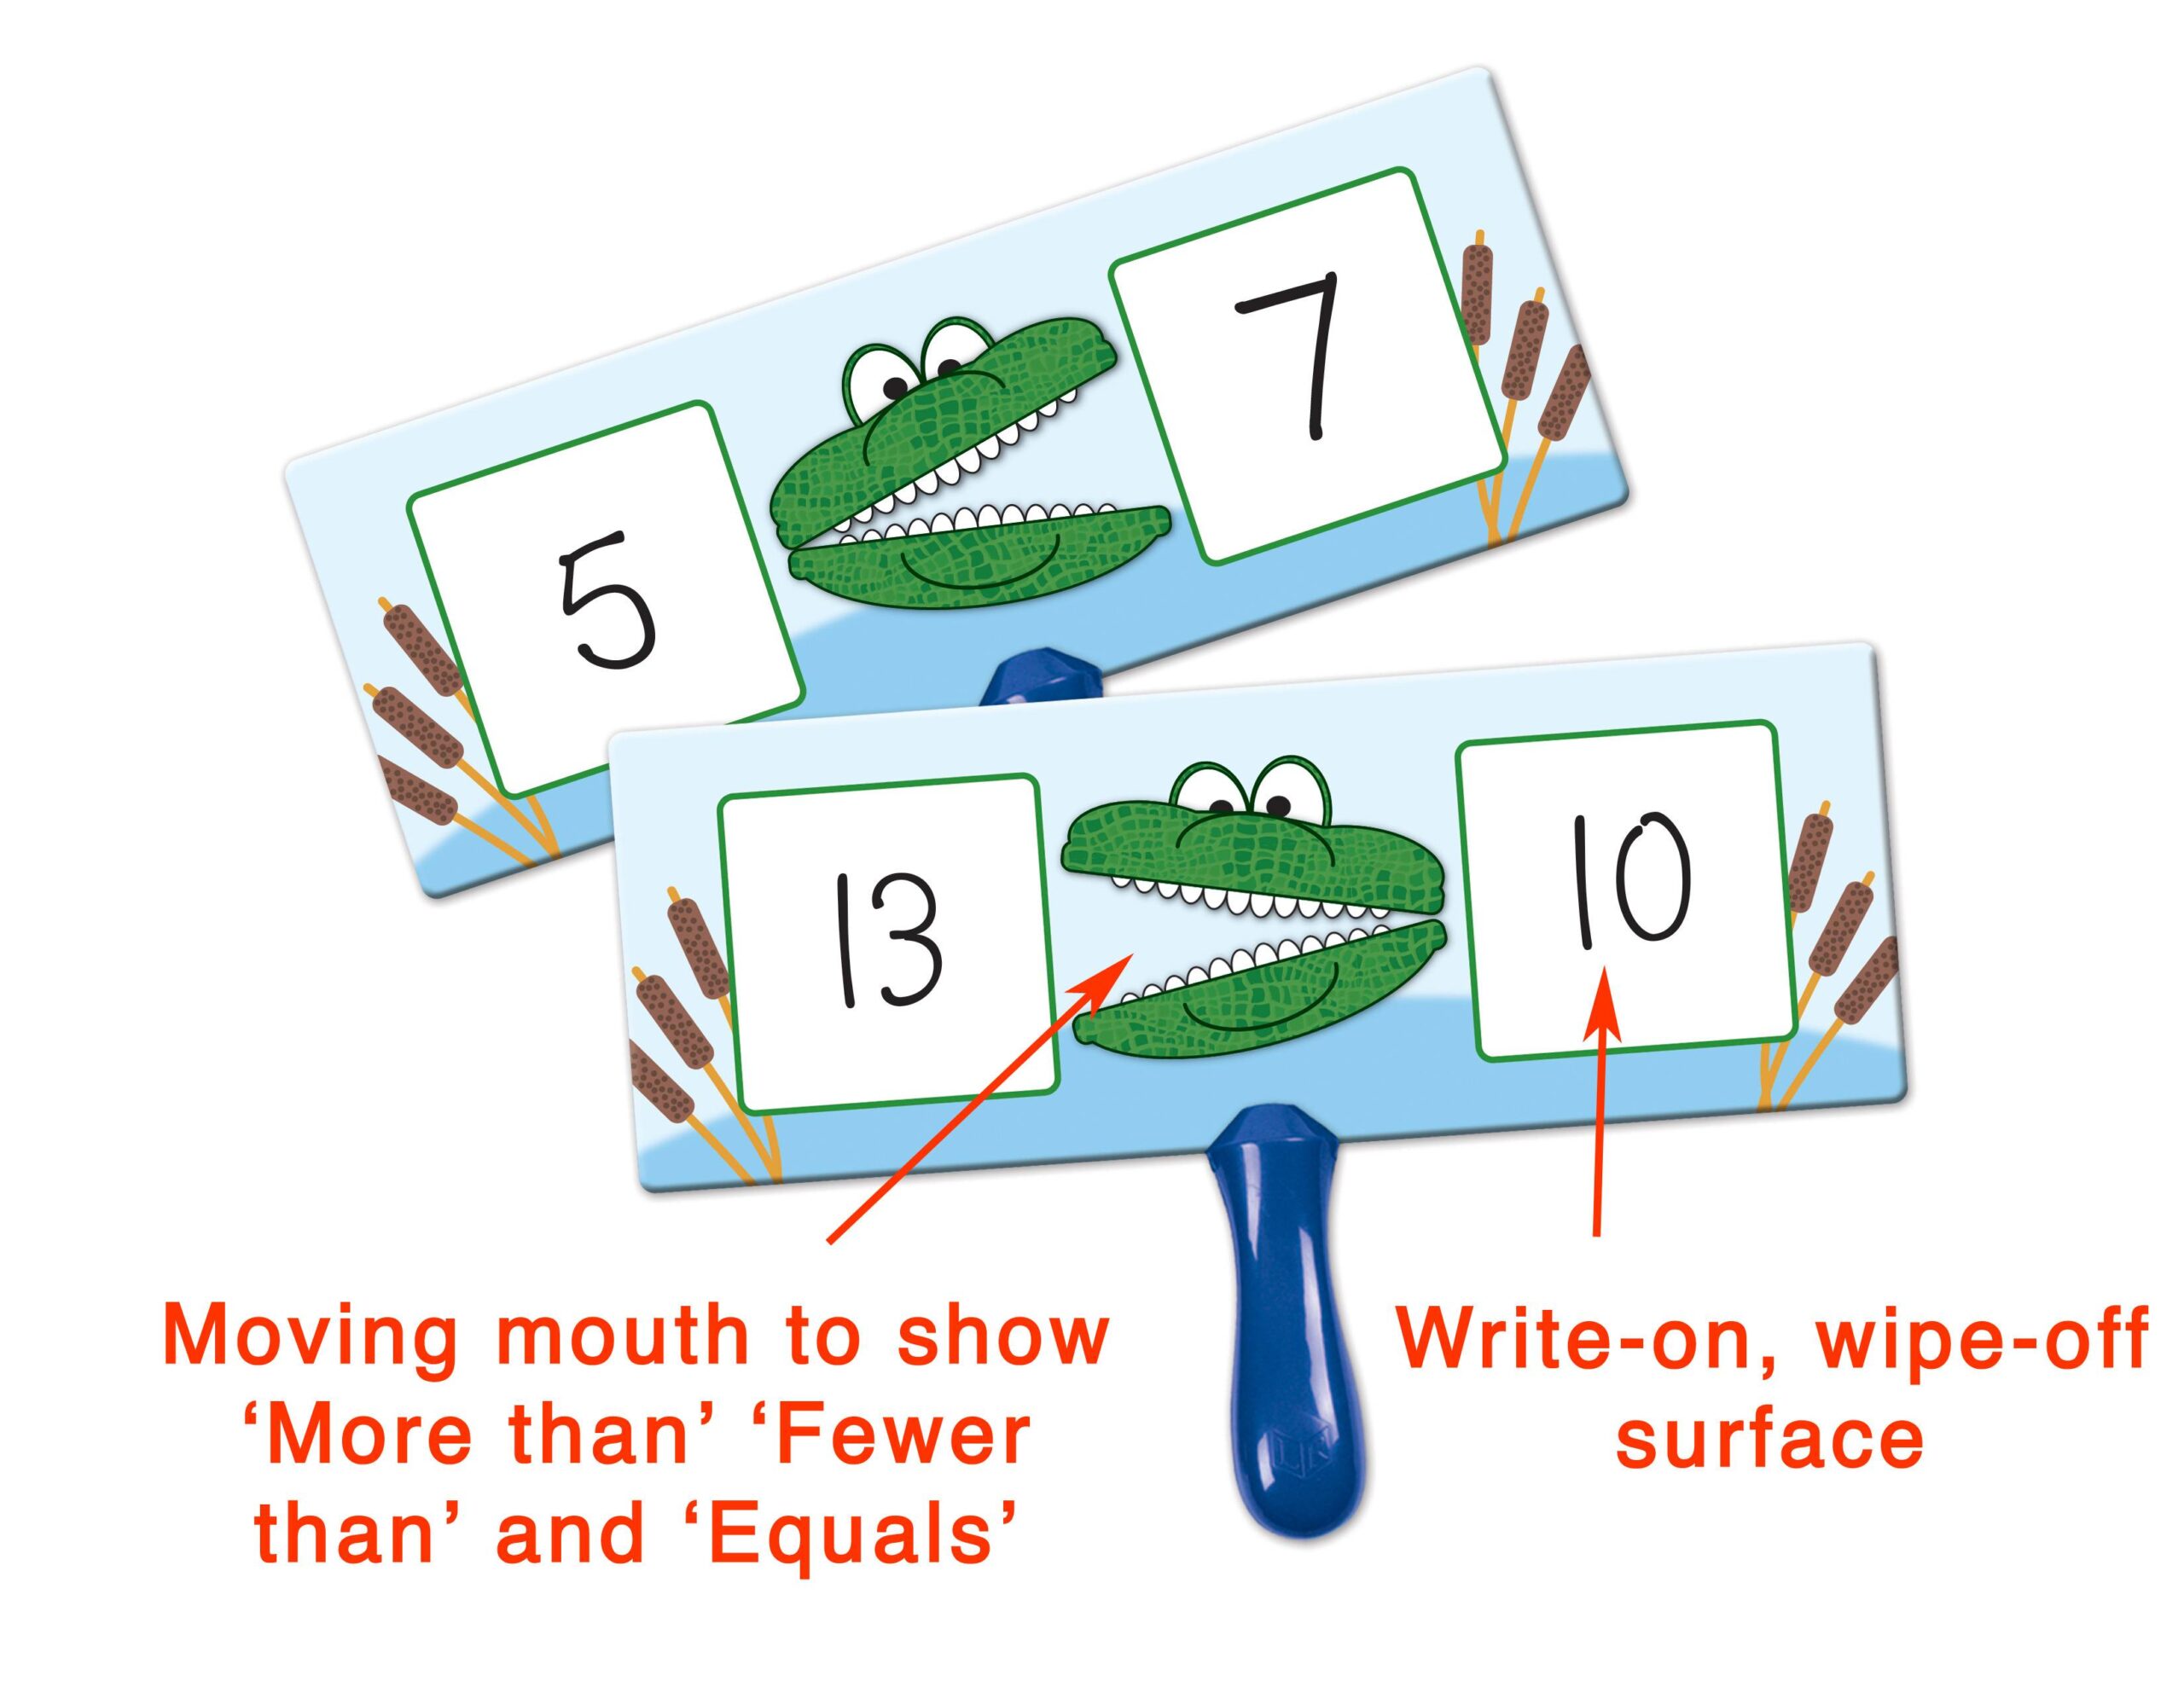 GREATER GATOR ANSWER BOARDS (SET OF 4)